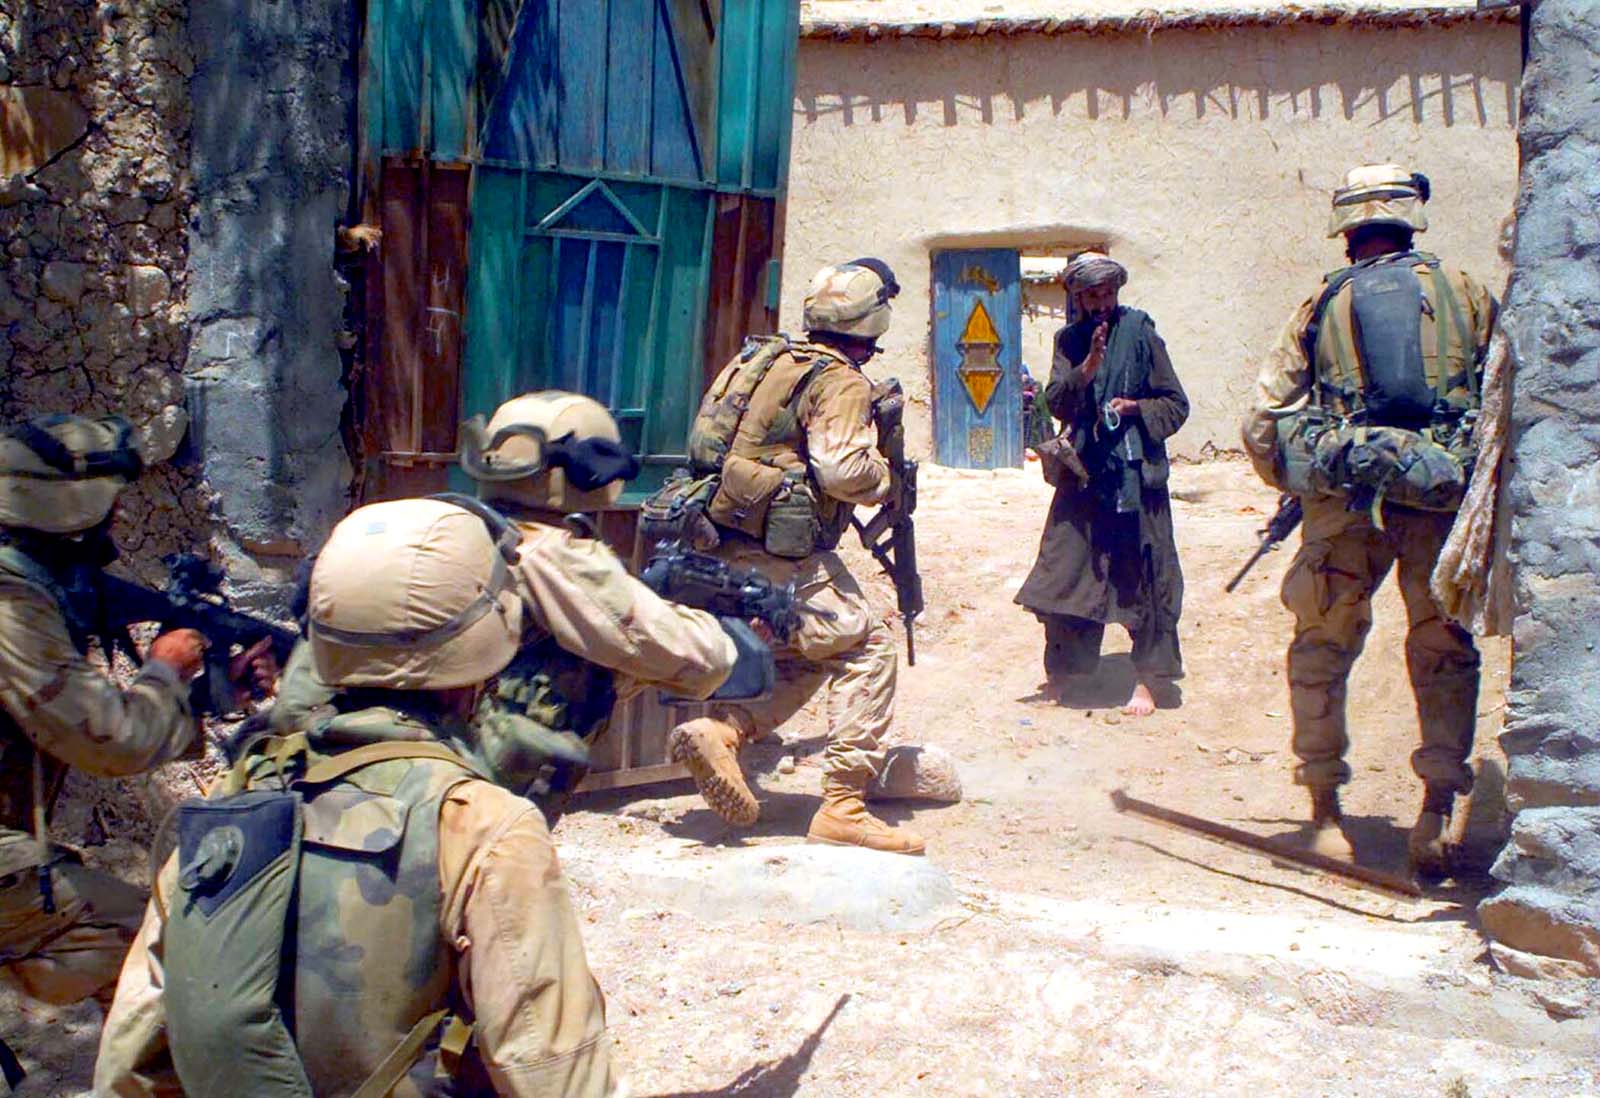 A Hollywood director explains what it was like to film soldiers fighting in Afghanistan